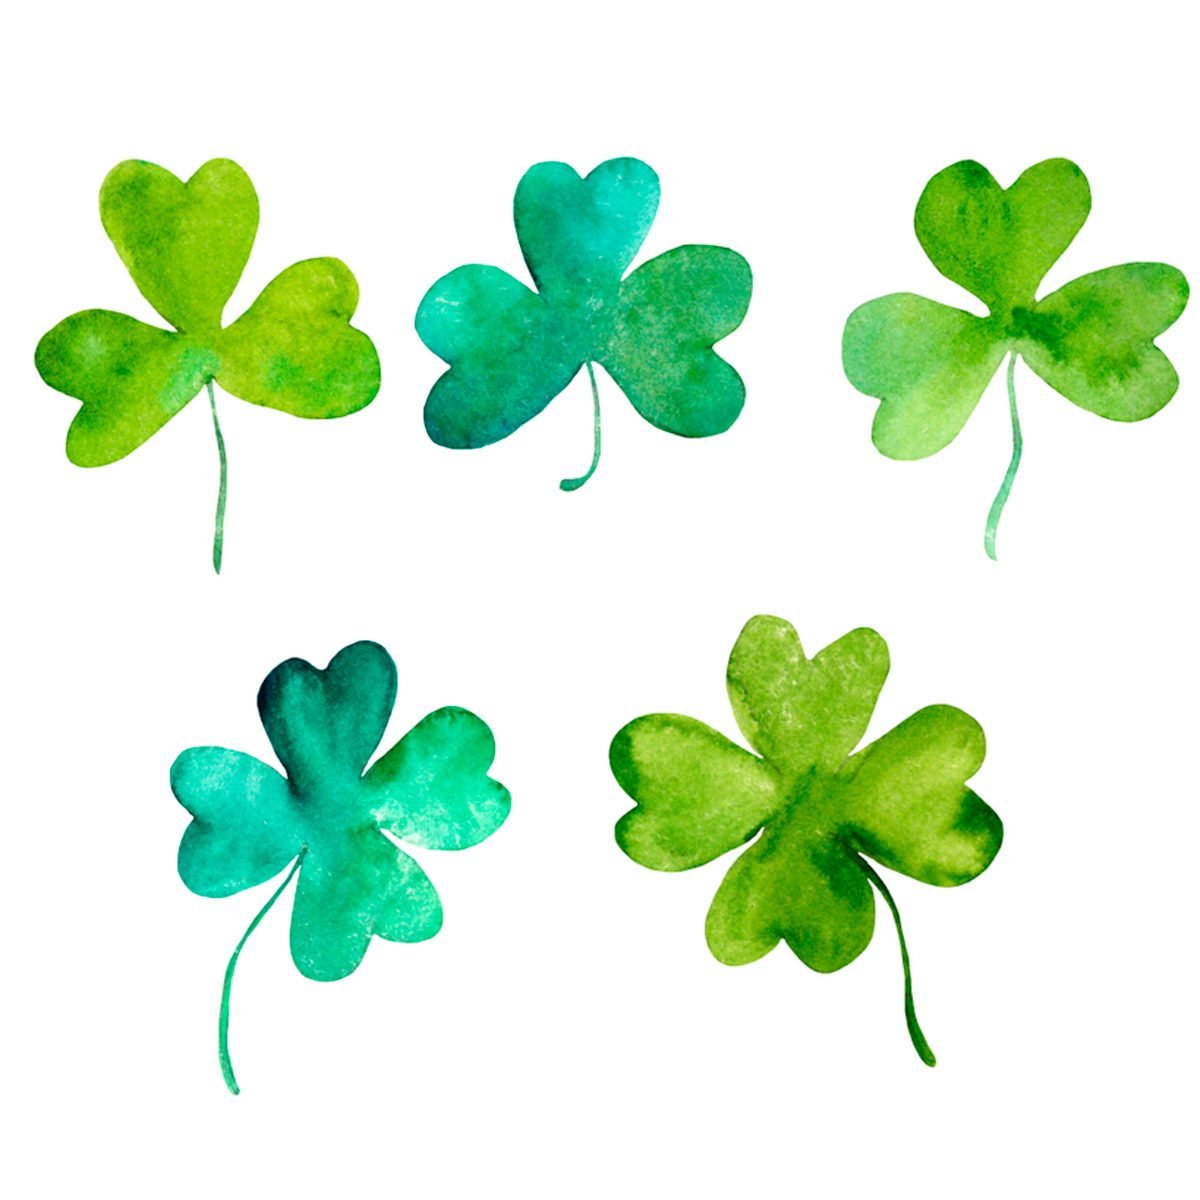 Shamrocks and Four-Leaf Clovers: What's the Difference?